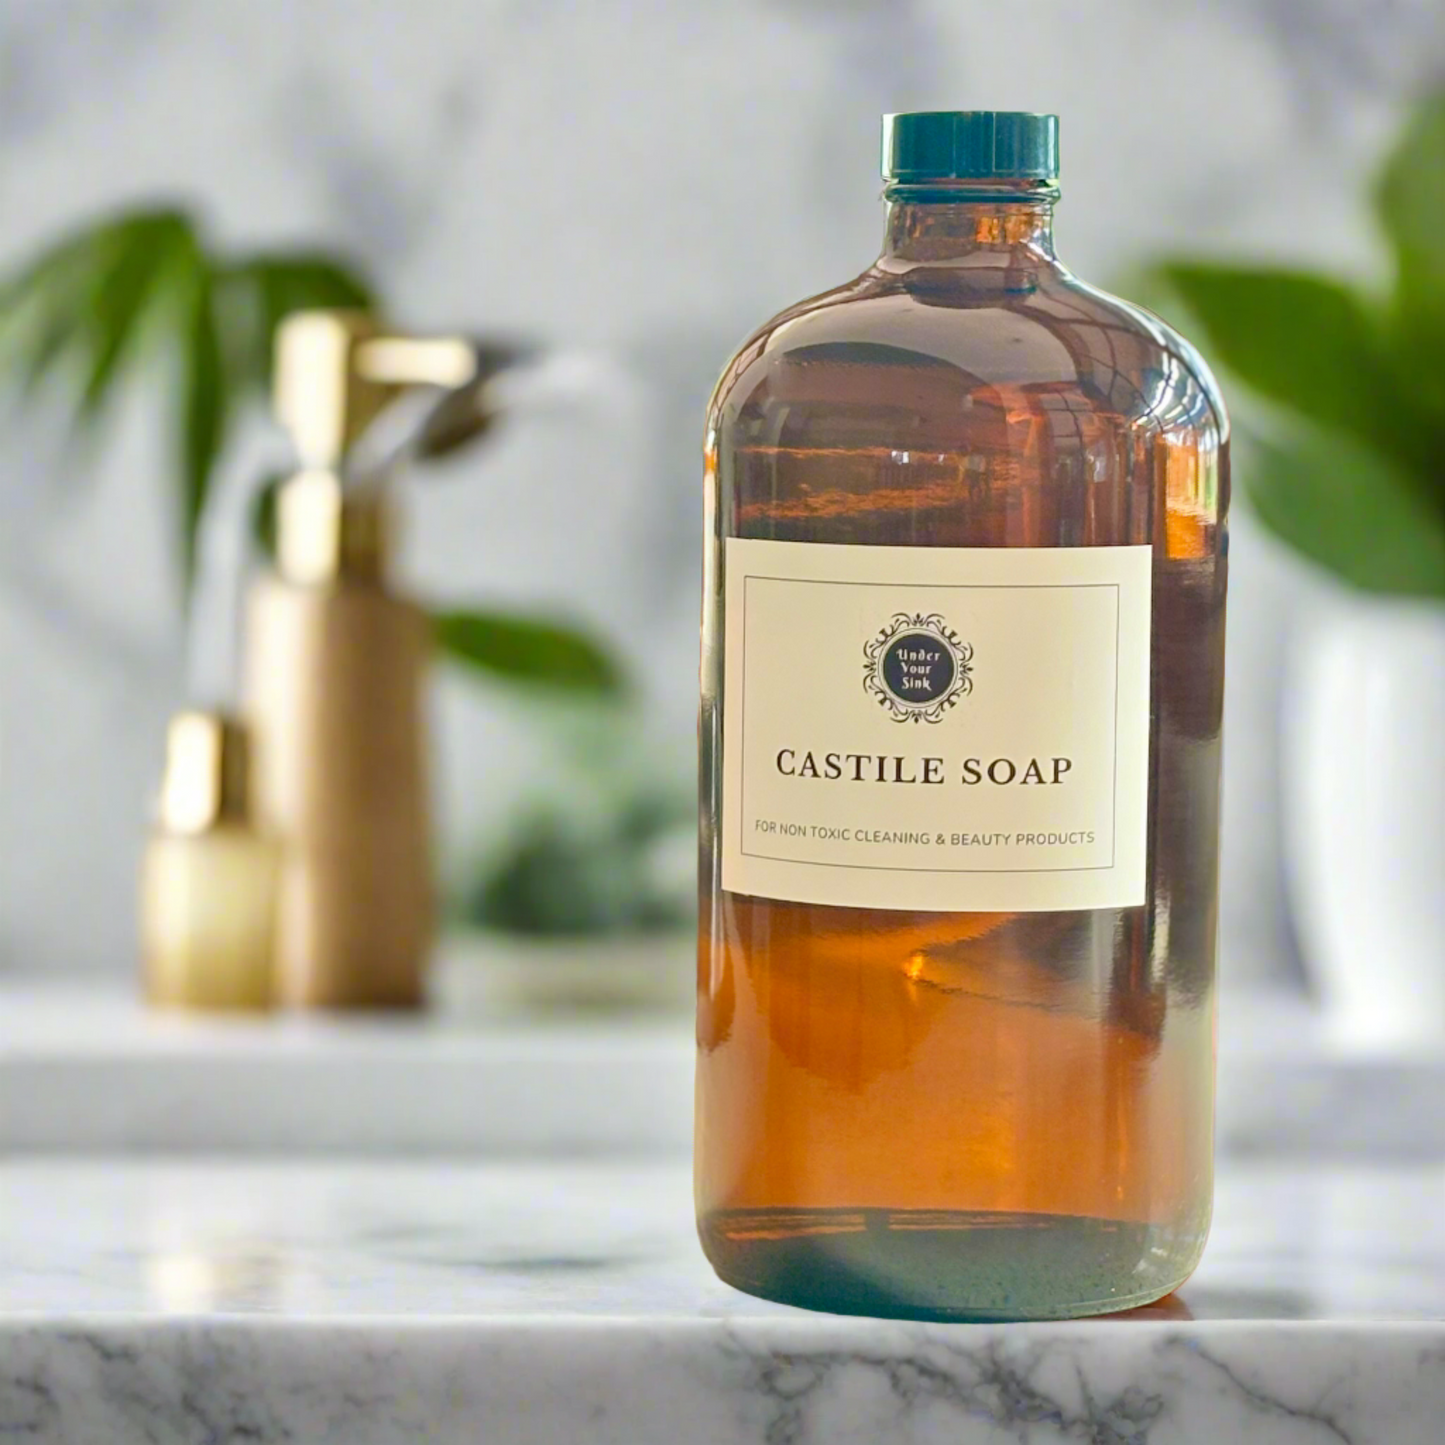 An amber glass bottle with a white label with Under your Sink Logo and description Castile Soap – For non toxic cleaning and beauty products. The bottles are set in a kitchen with a blurred background for effect. It is a product image for website as this is for sale in various sizes, online with Australia wide delivery.